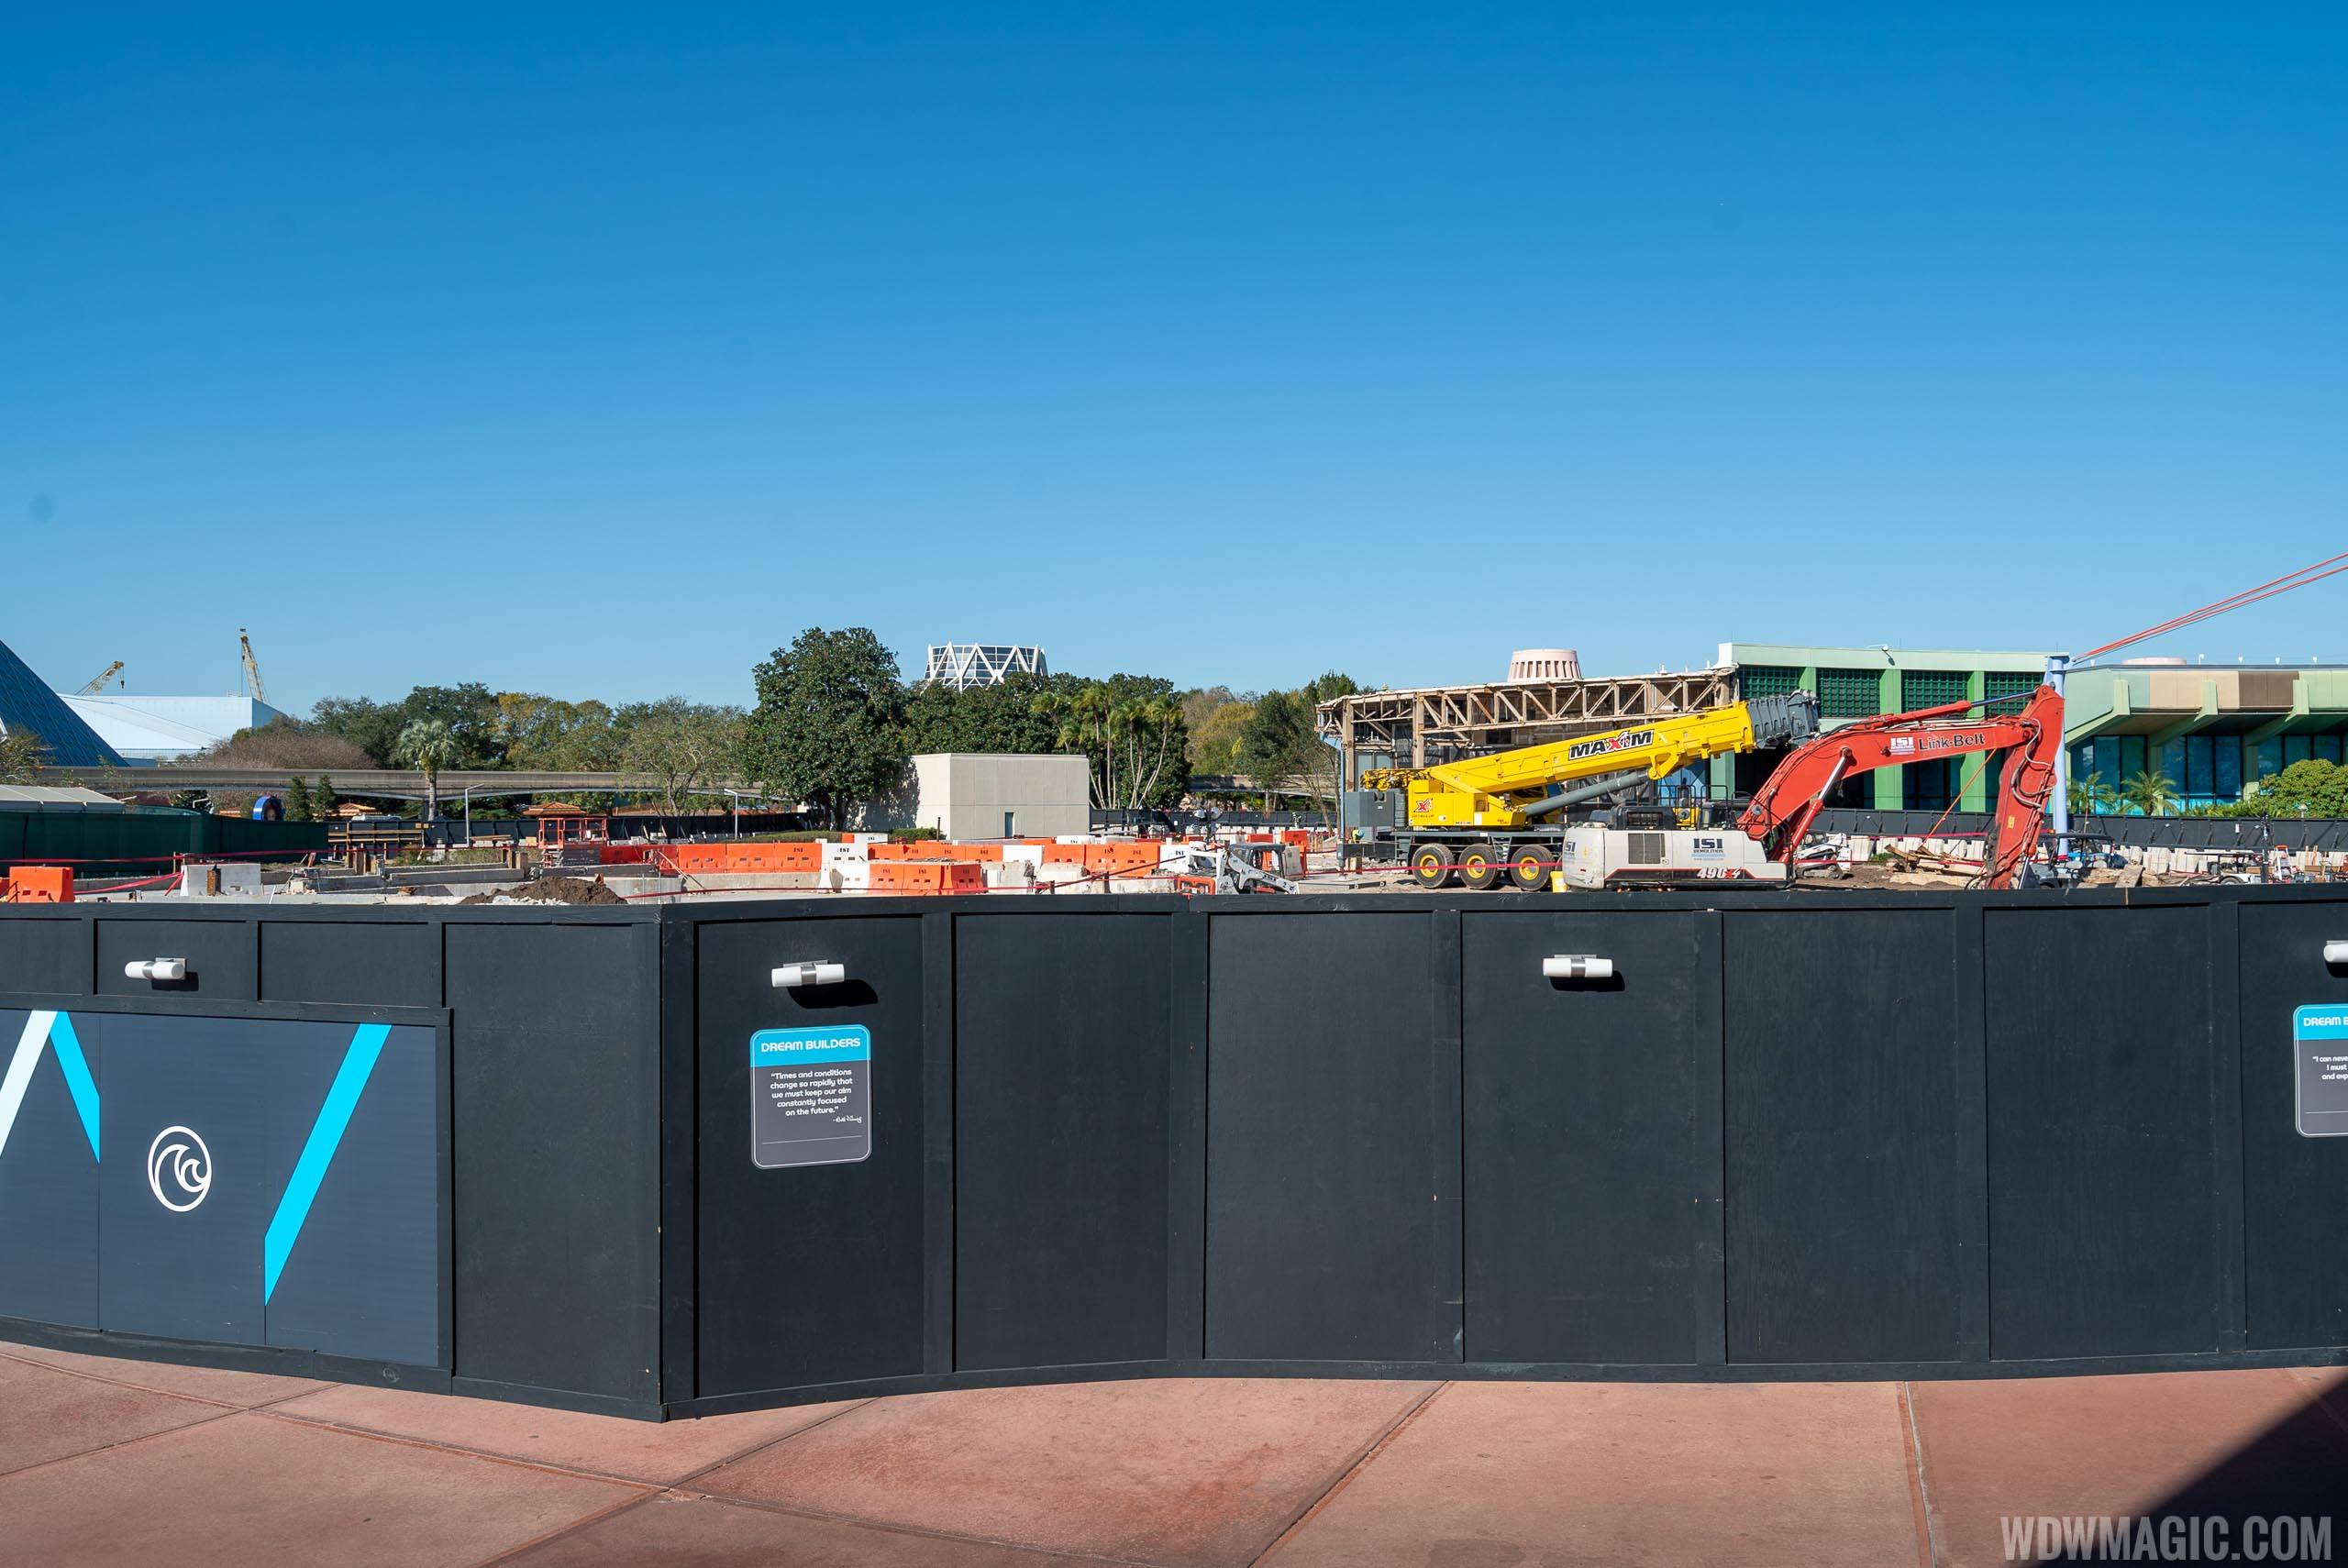 PHOTOS - Communicore West building south of the breezeway now completely removed at Epcot